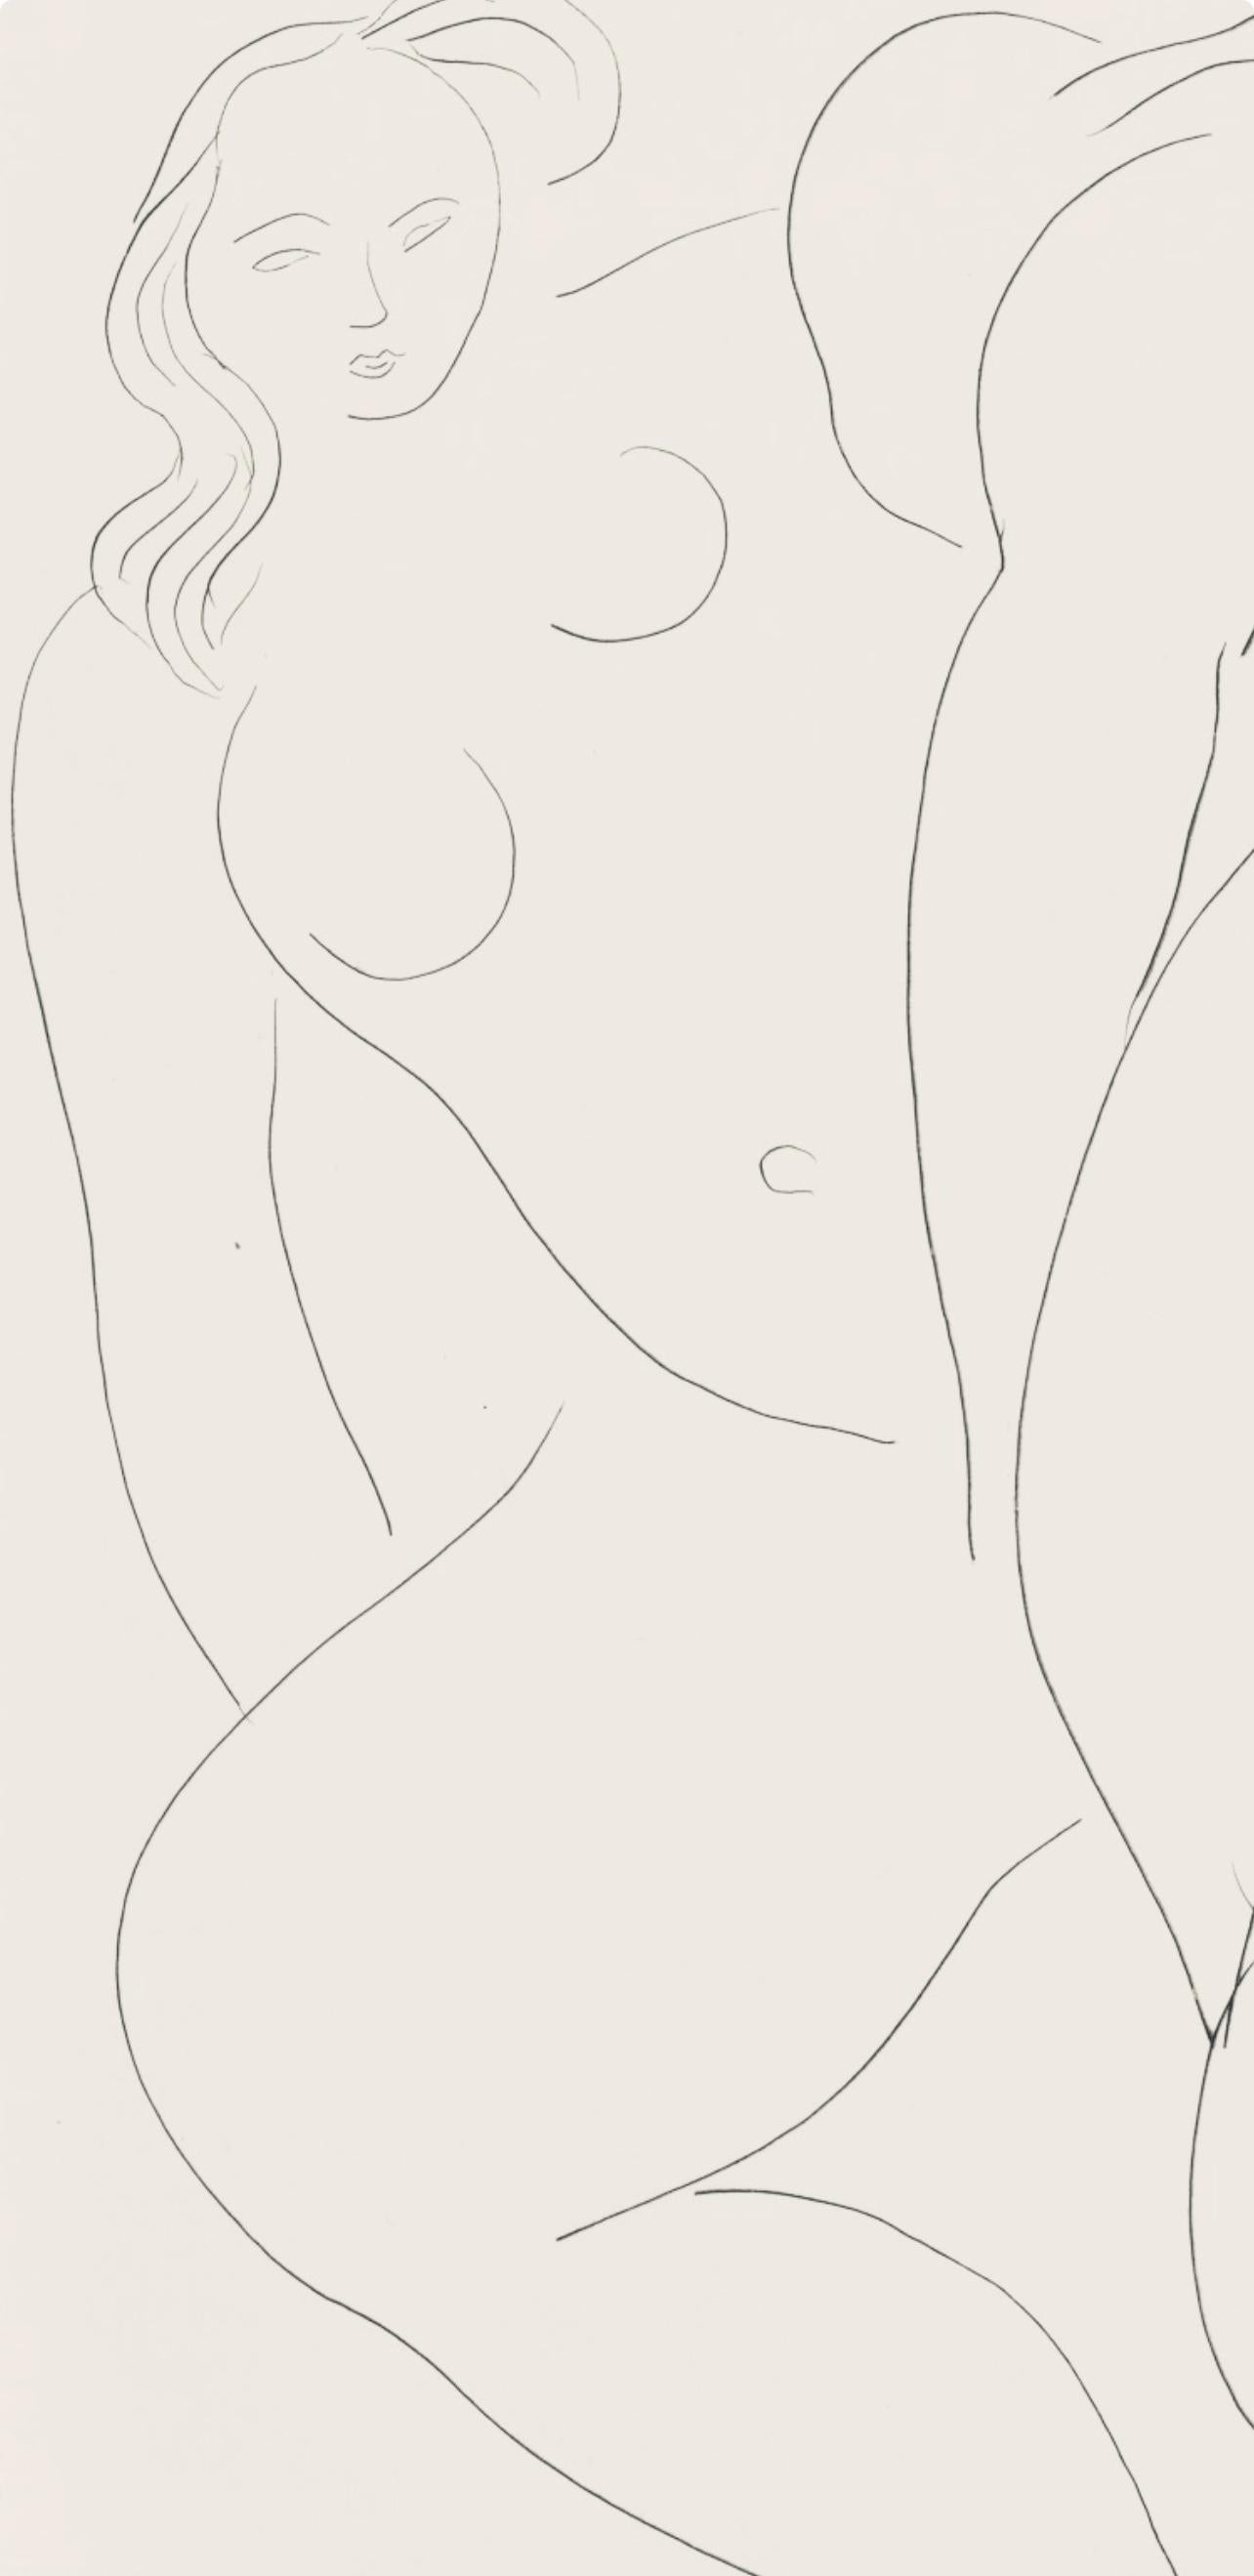 Matisse, Nymphes et faune (Nymphs and Faun), Poésies (after) - Print by Henri Matisse